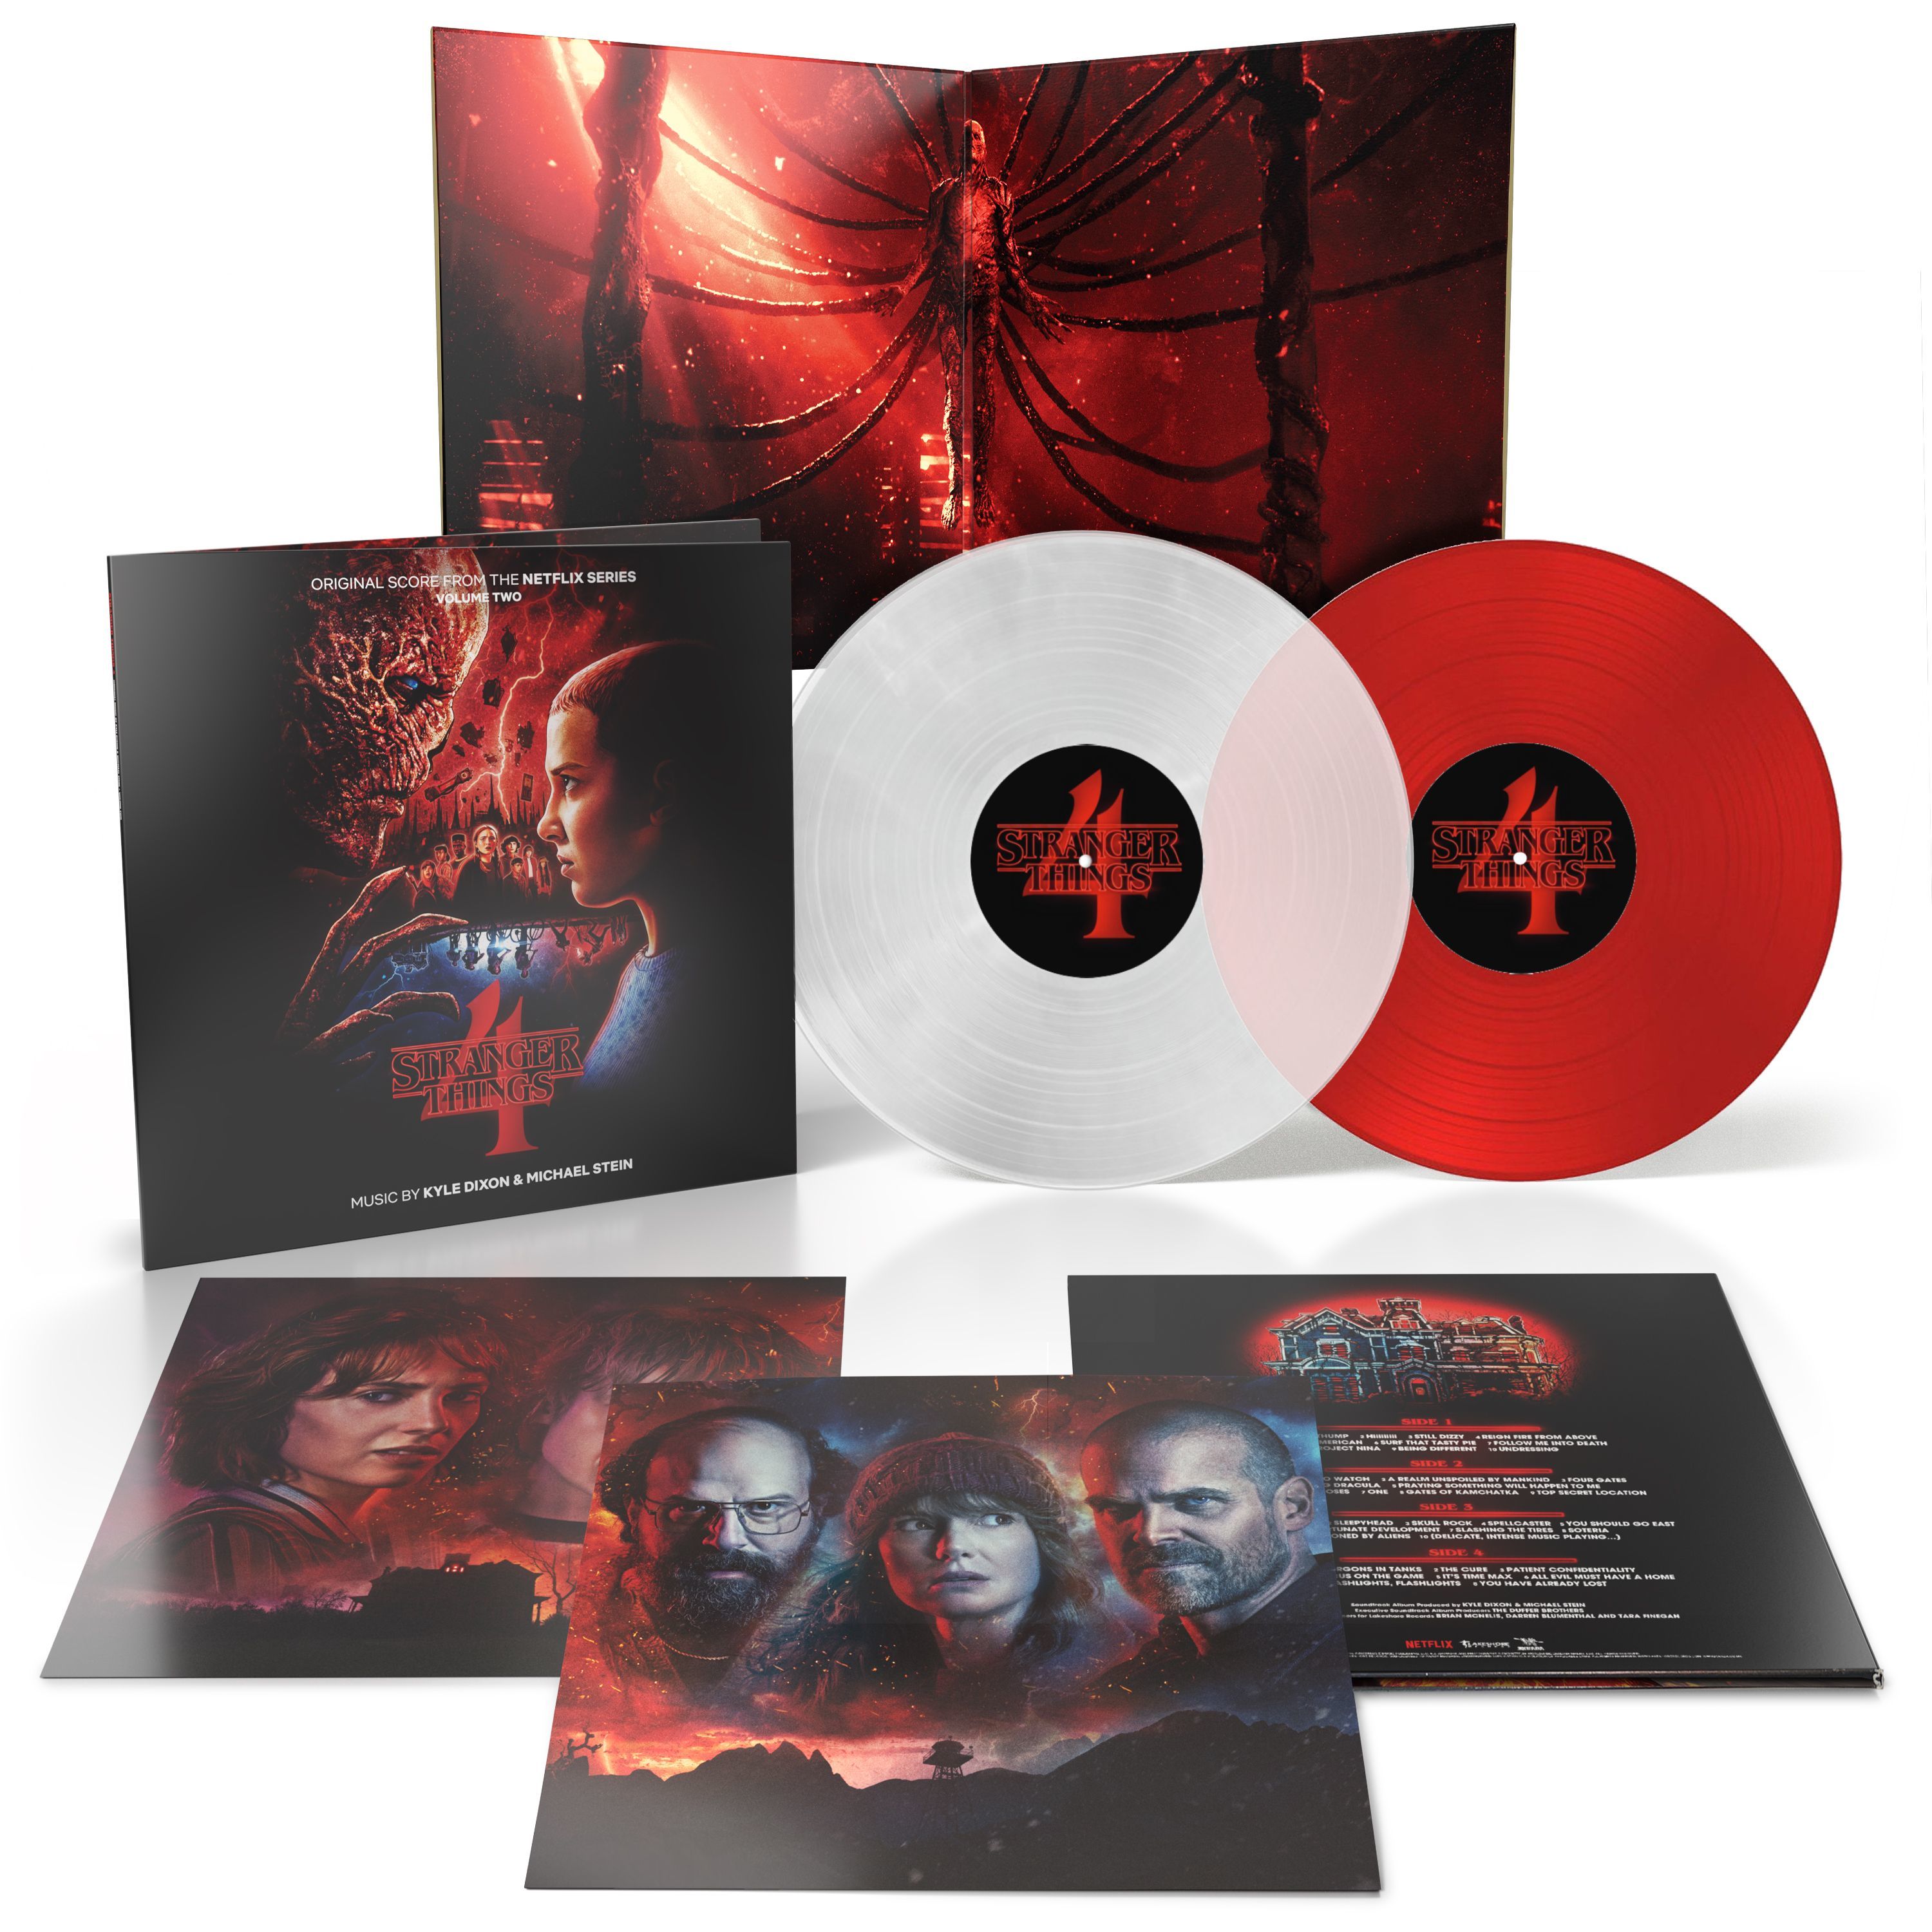 Stranger Things 4 - Volume 2 Original Score From The Netflix Series: Limited Edition Clear & Red Vinyl 2LP